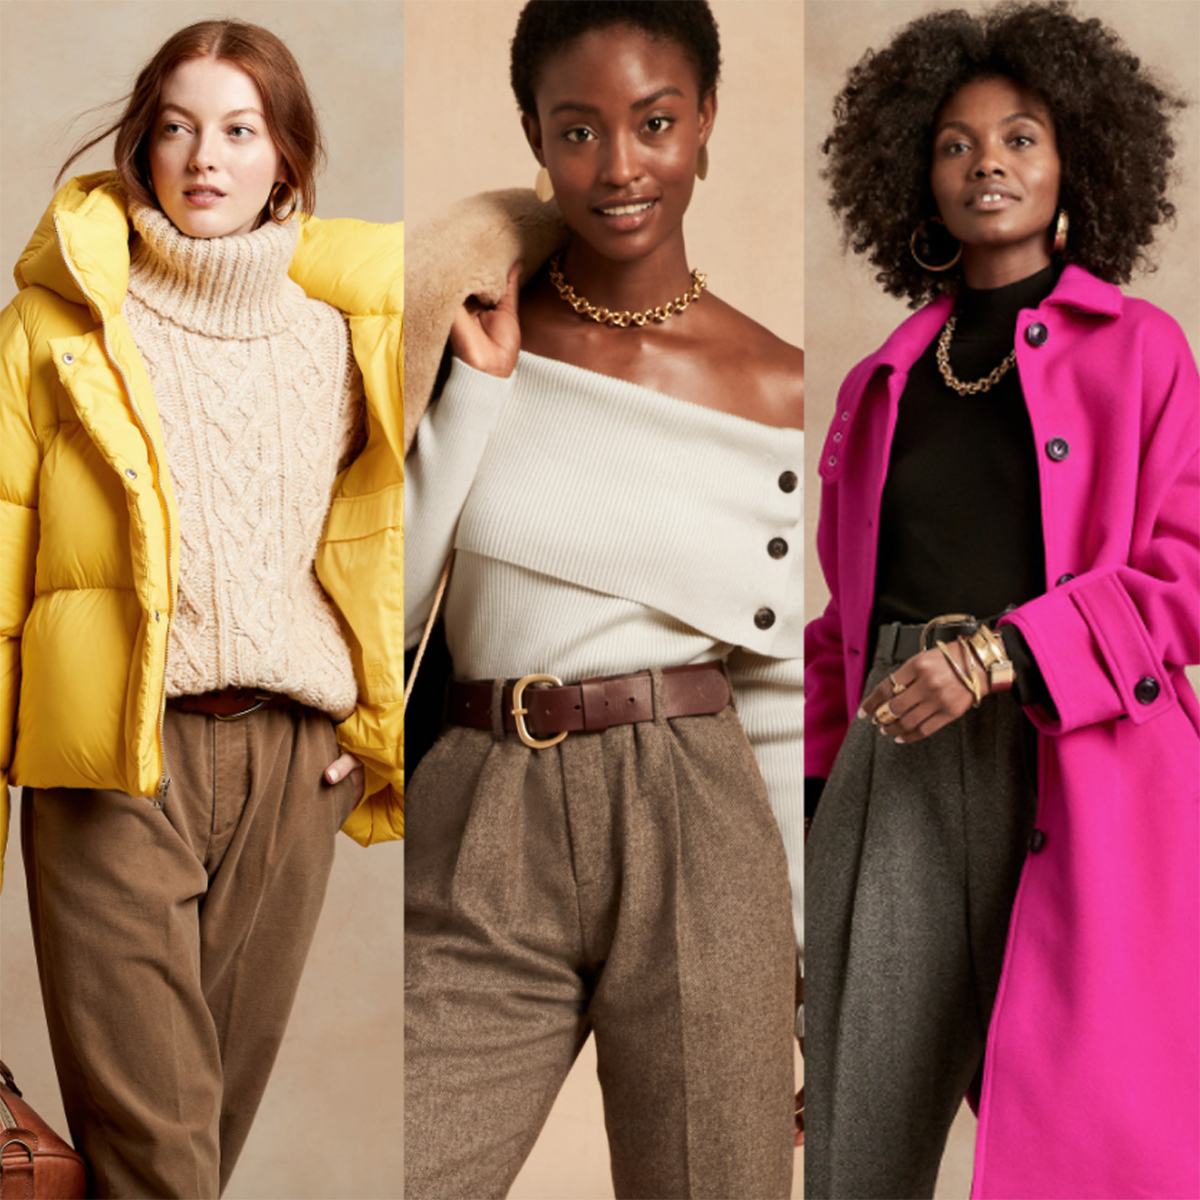 Best Winter Clothes From Banana Republic Under $100